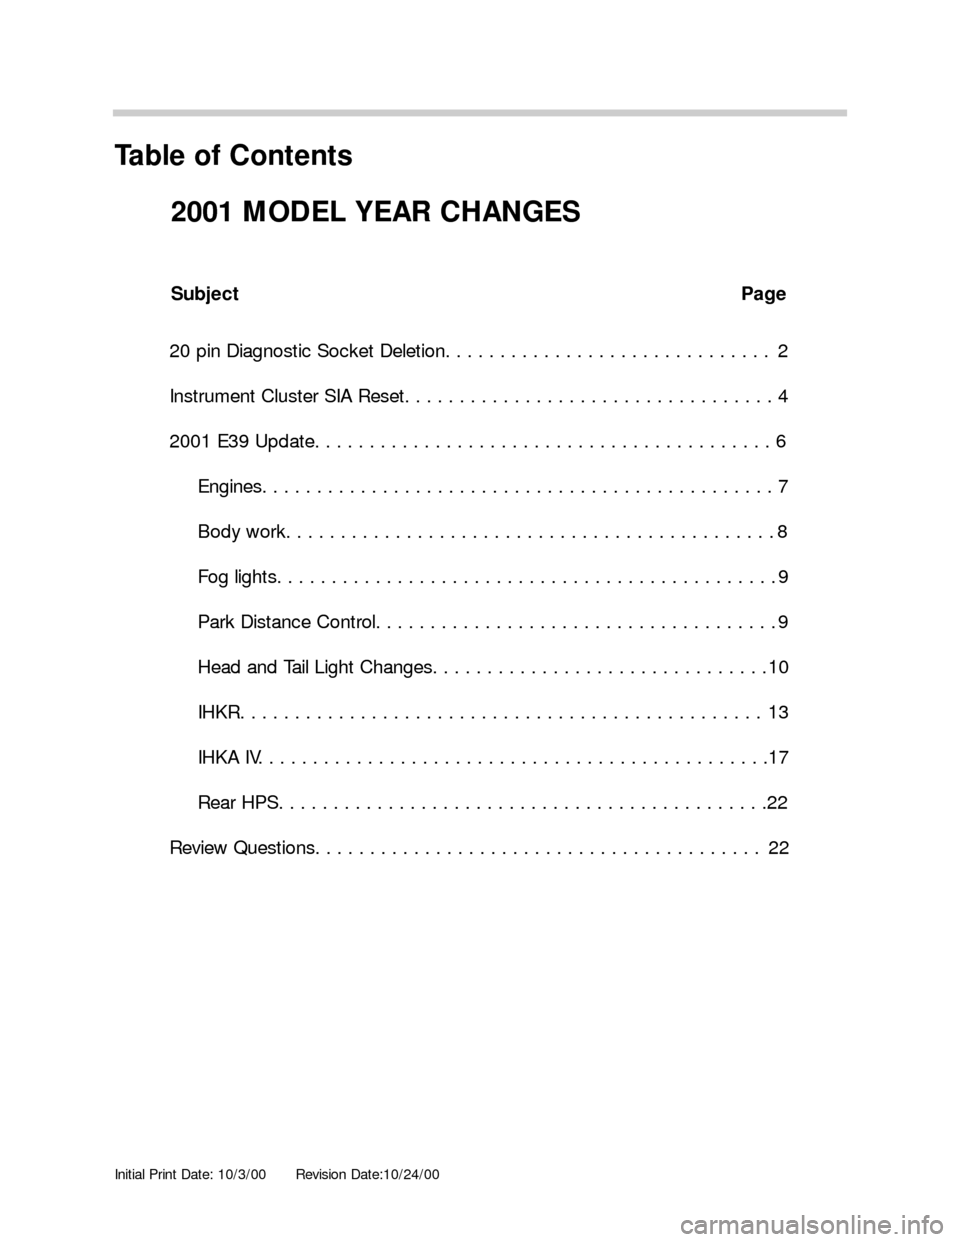 BMW 3 SERIES 2005 E46 Model Yar Changes Initial Print Date: 10/3/00Revision Date:10/24/00
Subject Page
20 pin Diagnostic Socket Deletion. . . . . . . . . . . . . . . . . . . . . . . . . . . . . . 2
Instrument Cluster SIA Reset. . . . . . . 